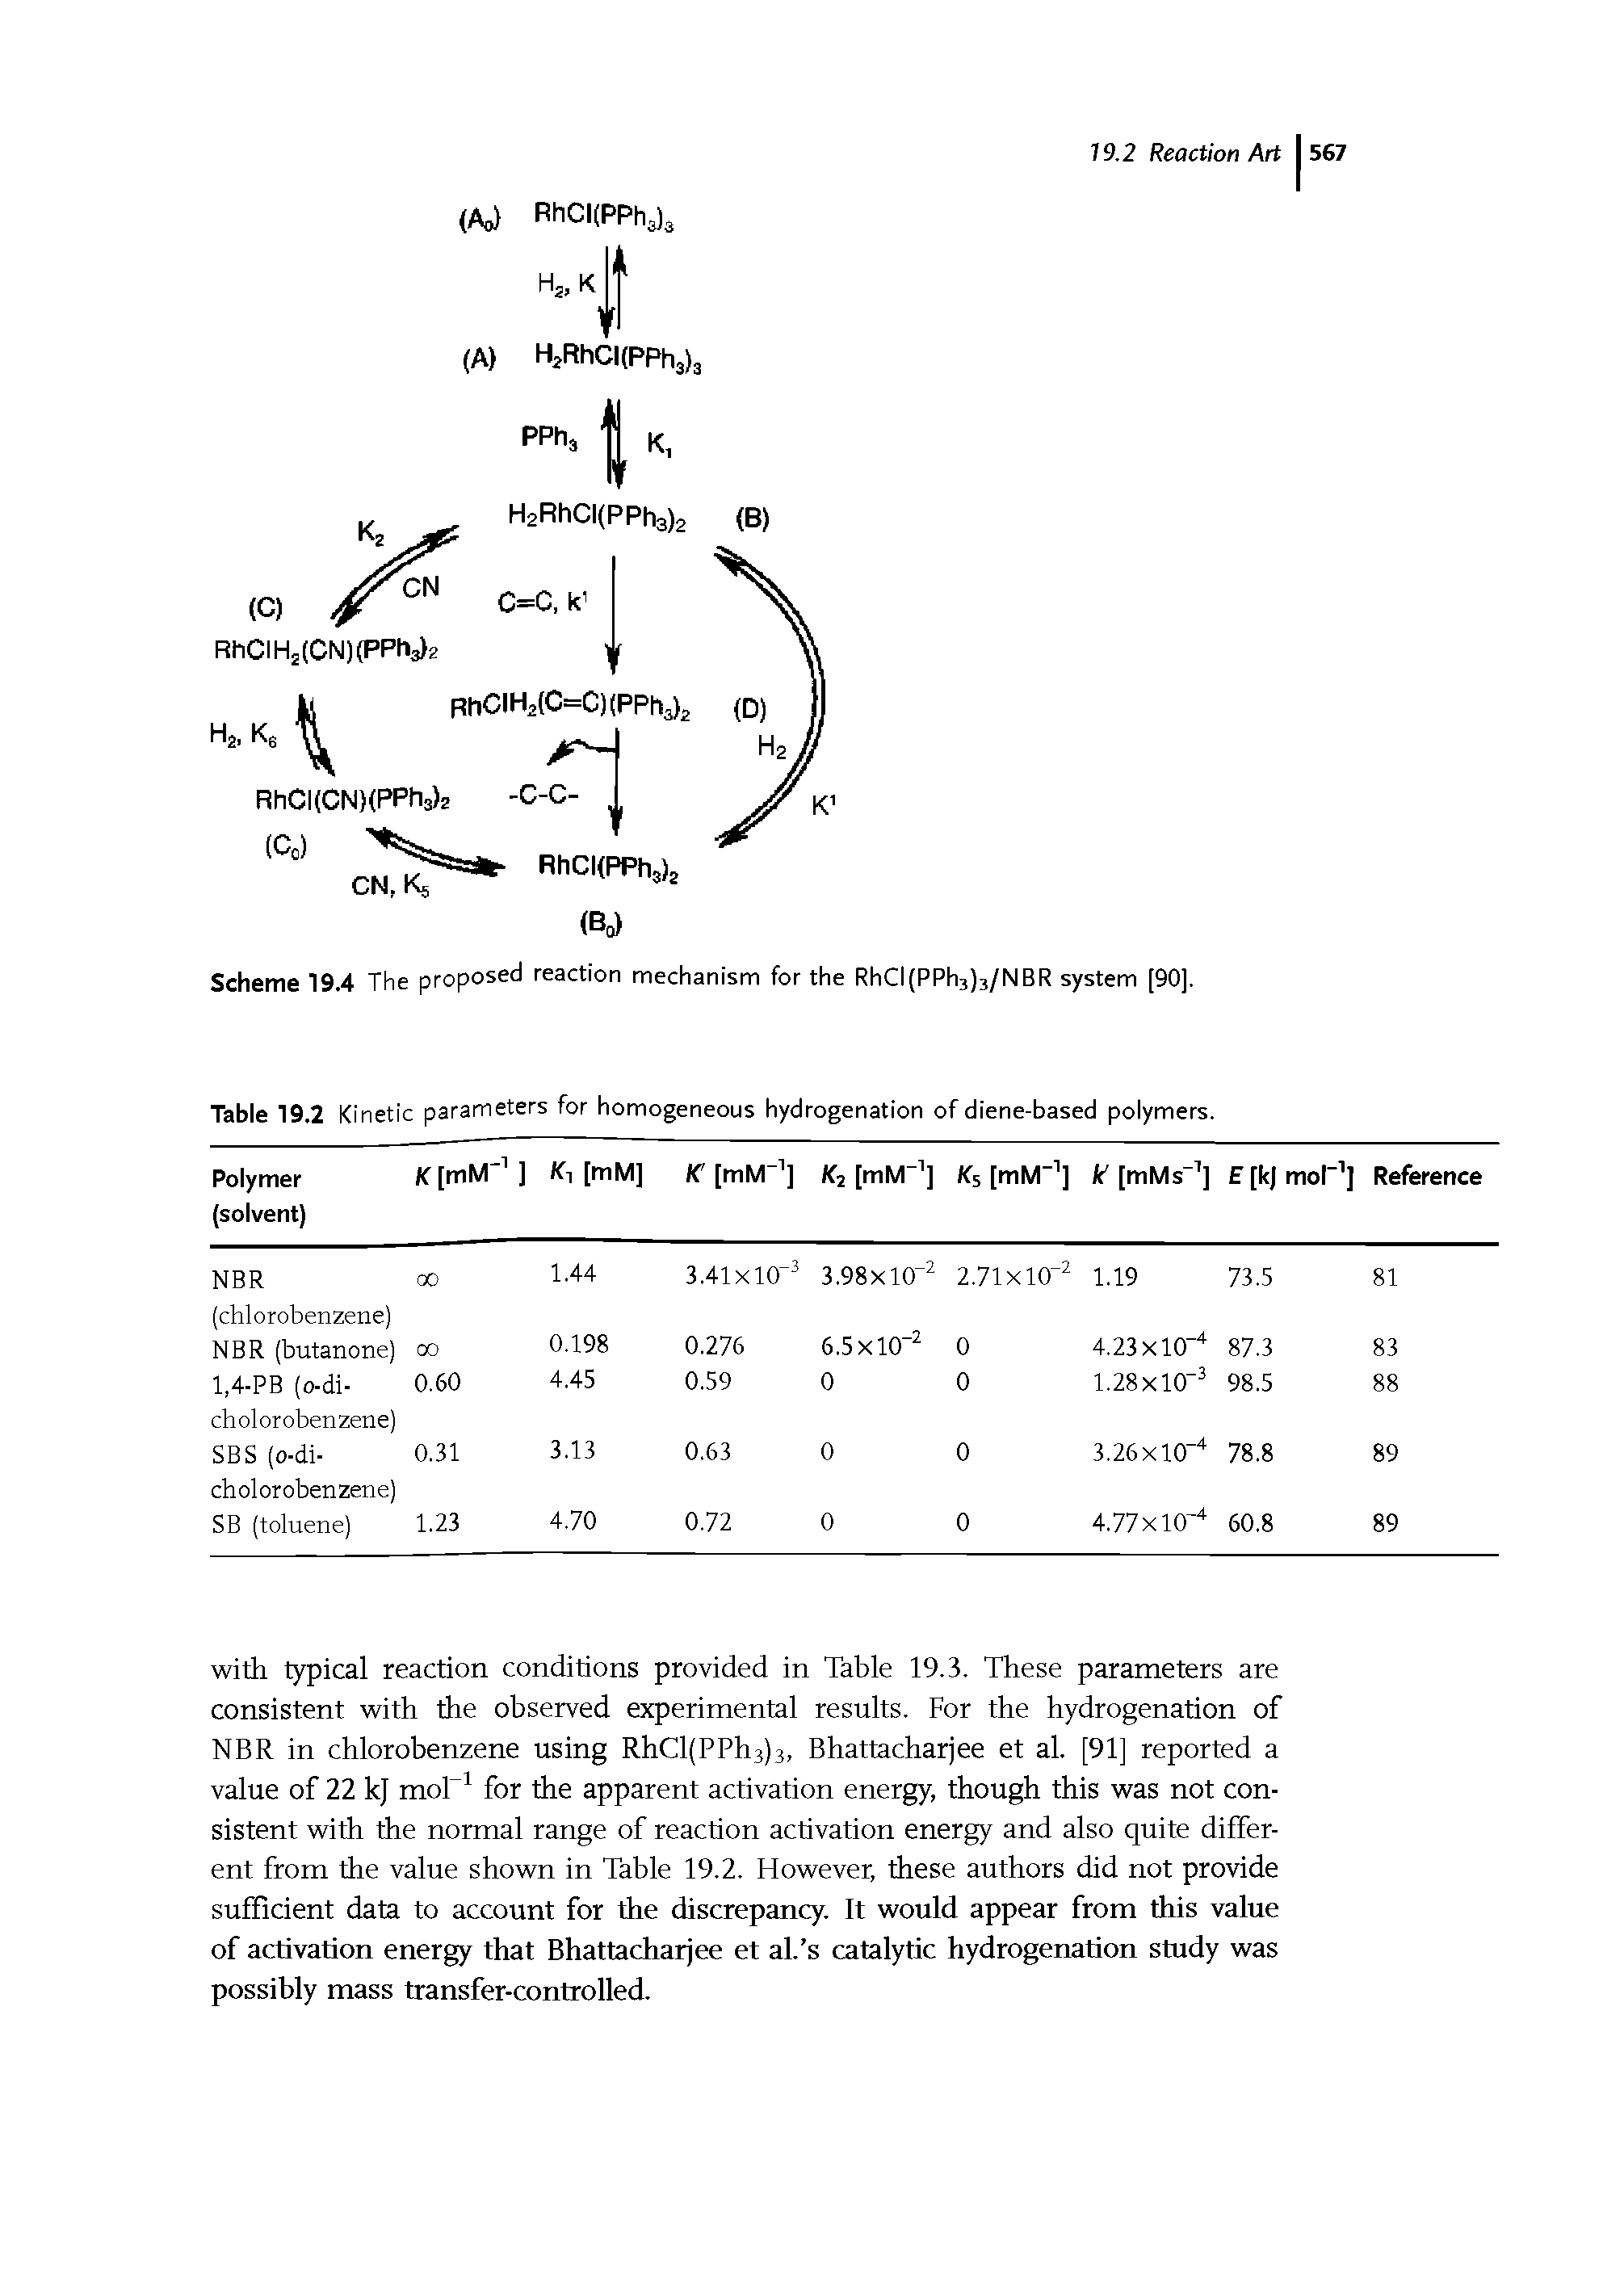 Table 19.2 Kinetic parameters for homogeneous hydrogenation of diene-based polymers.